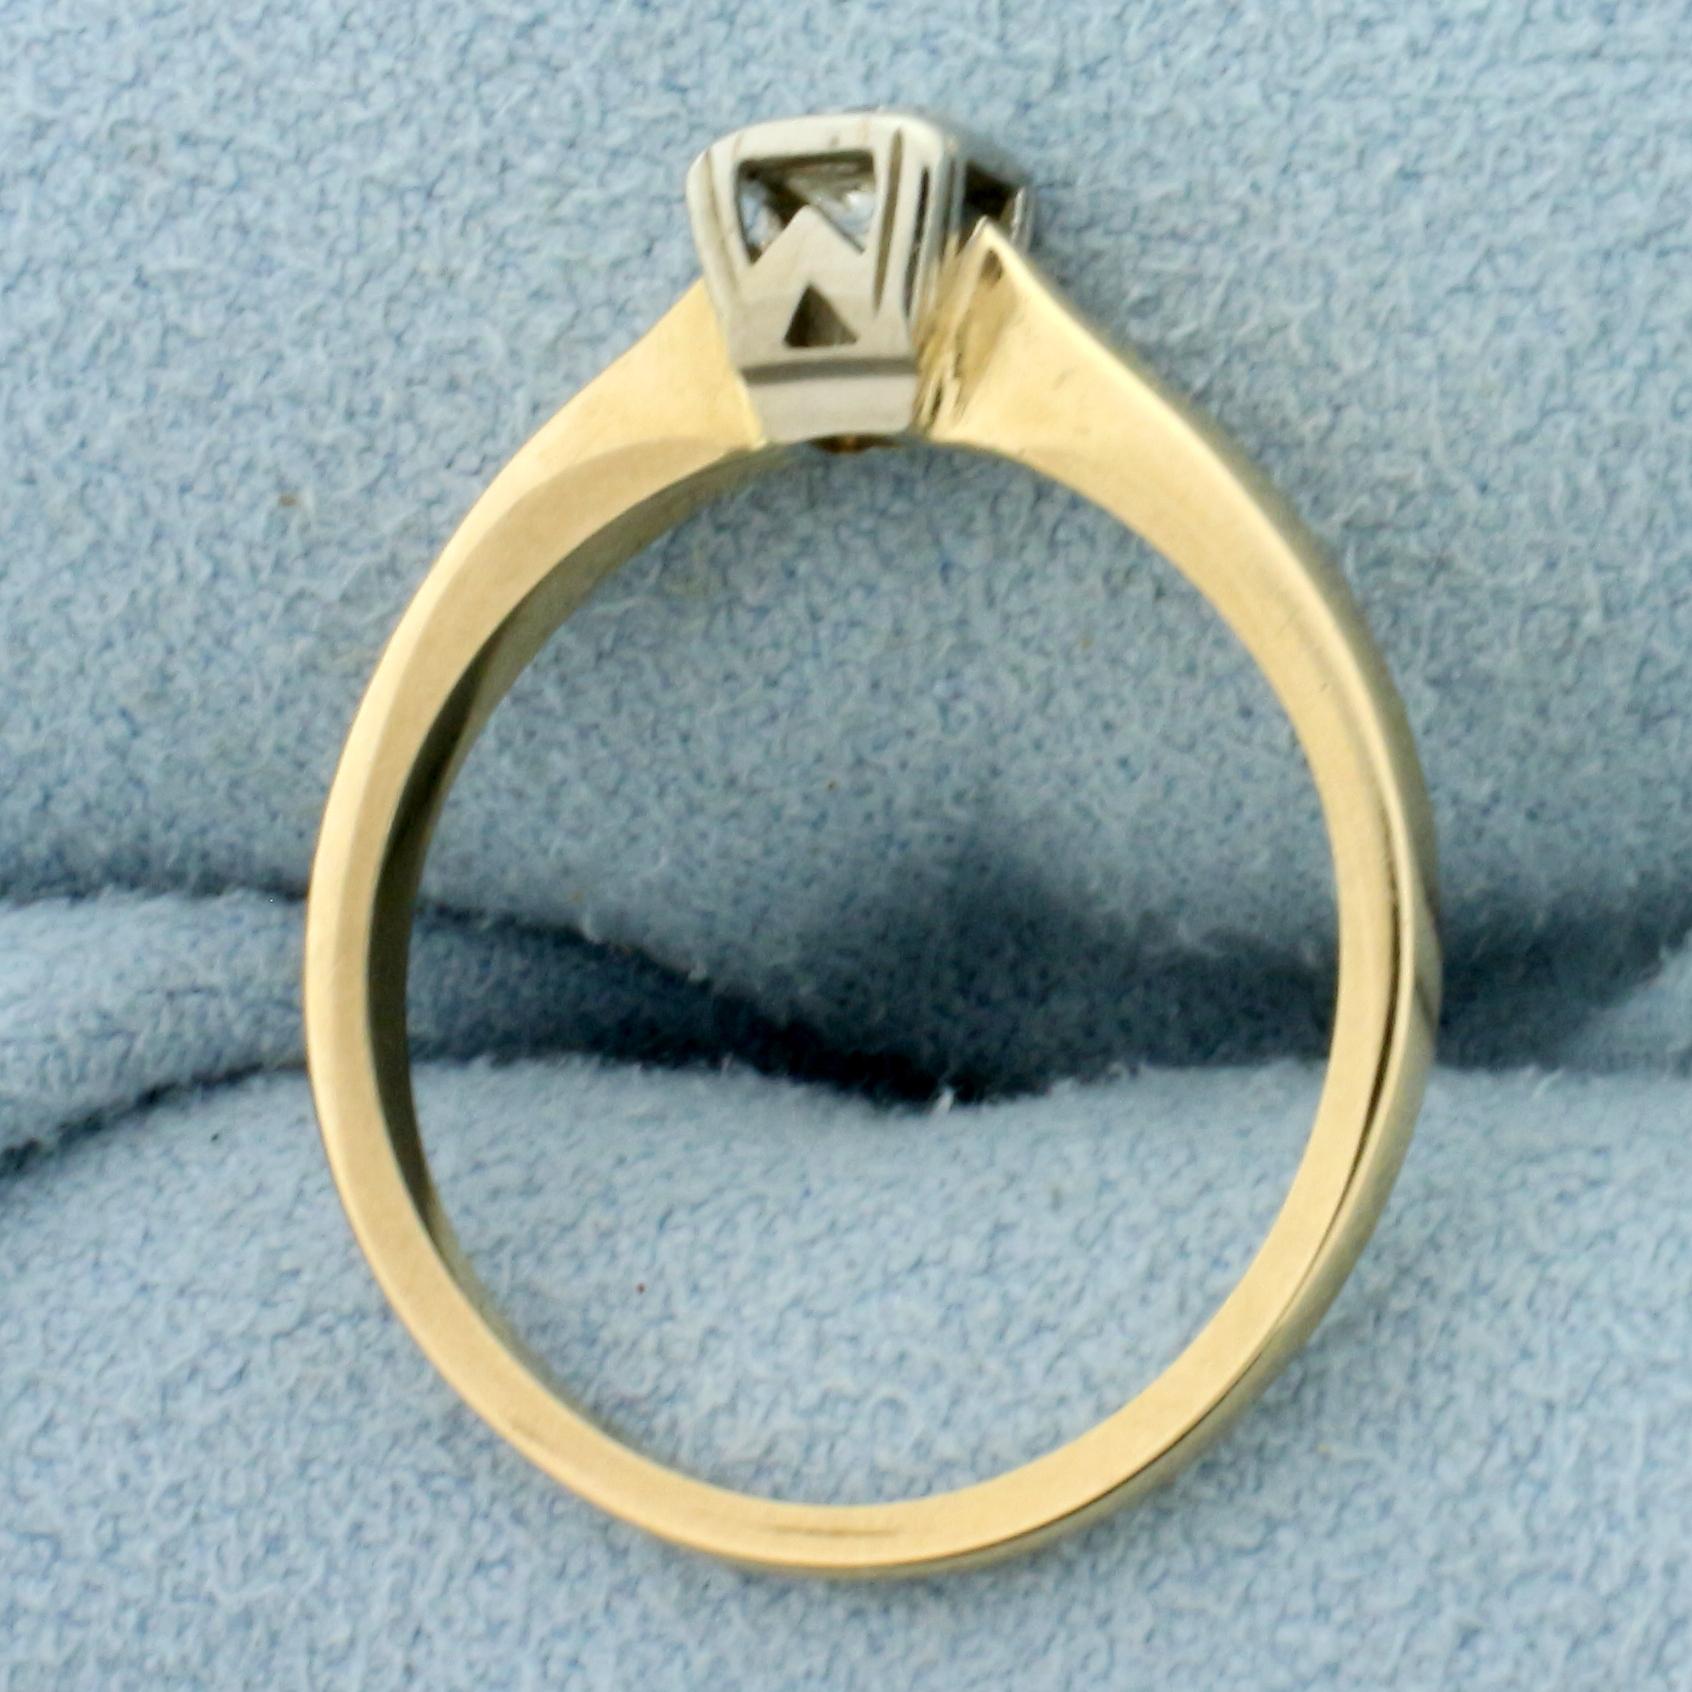 Vintage Diamond Solitaire Engagement Ring In 14k Yellow And White Gold